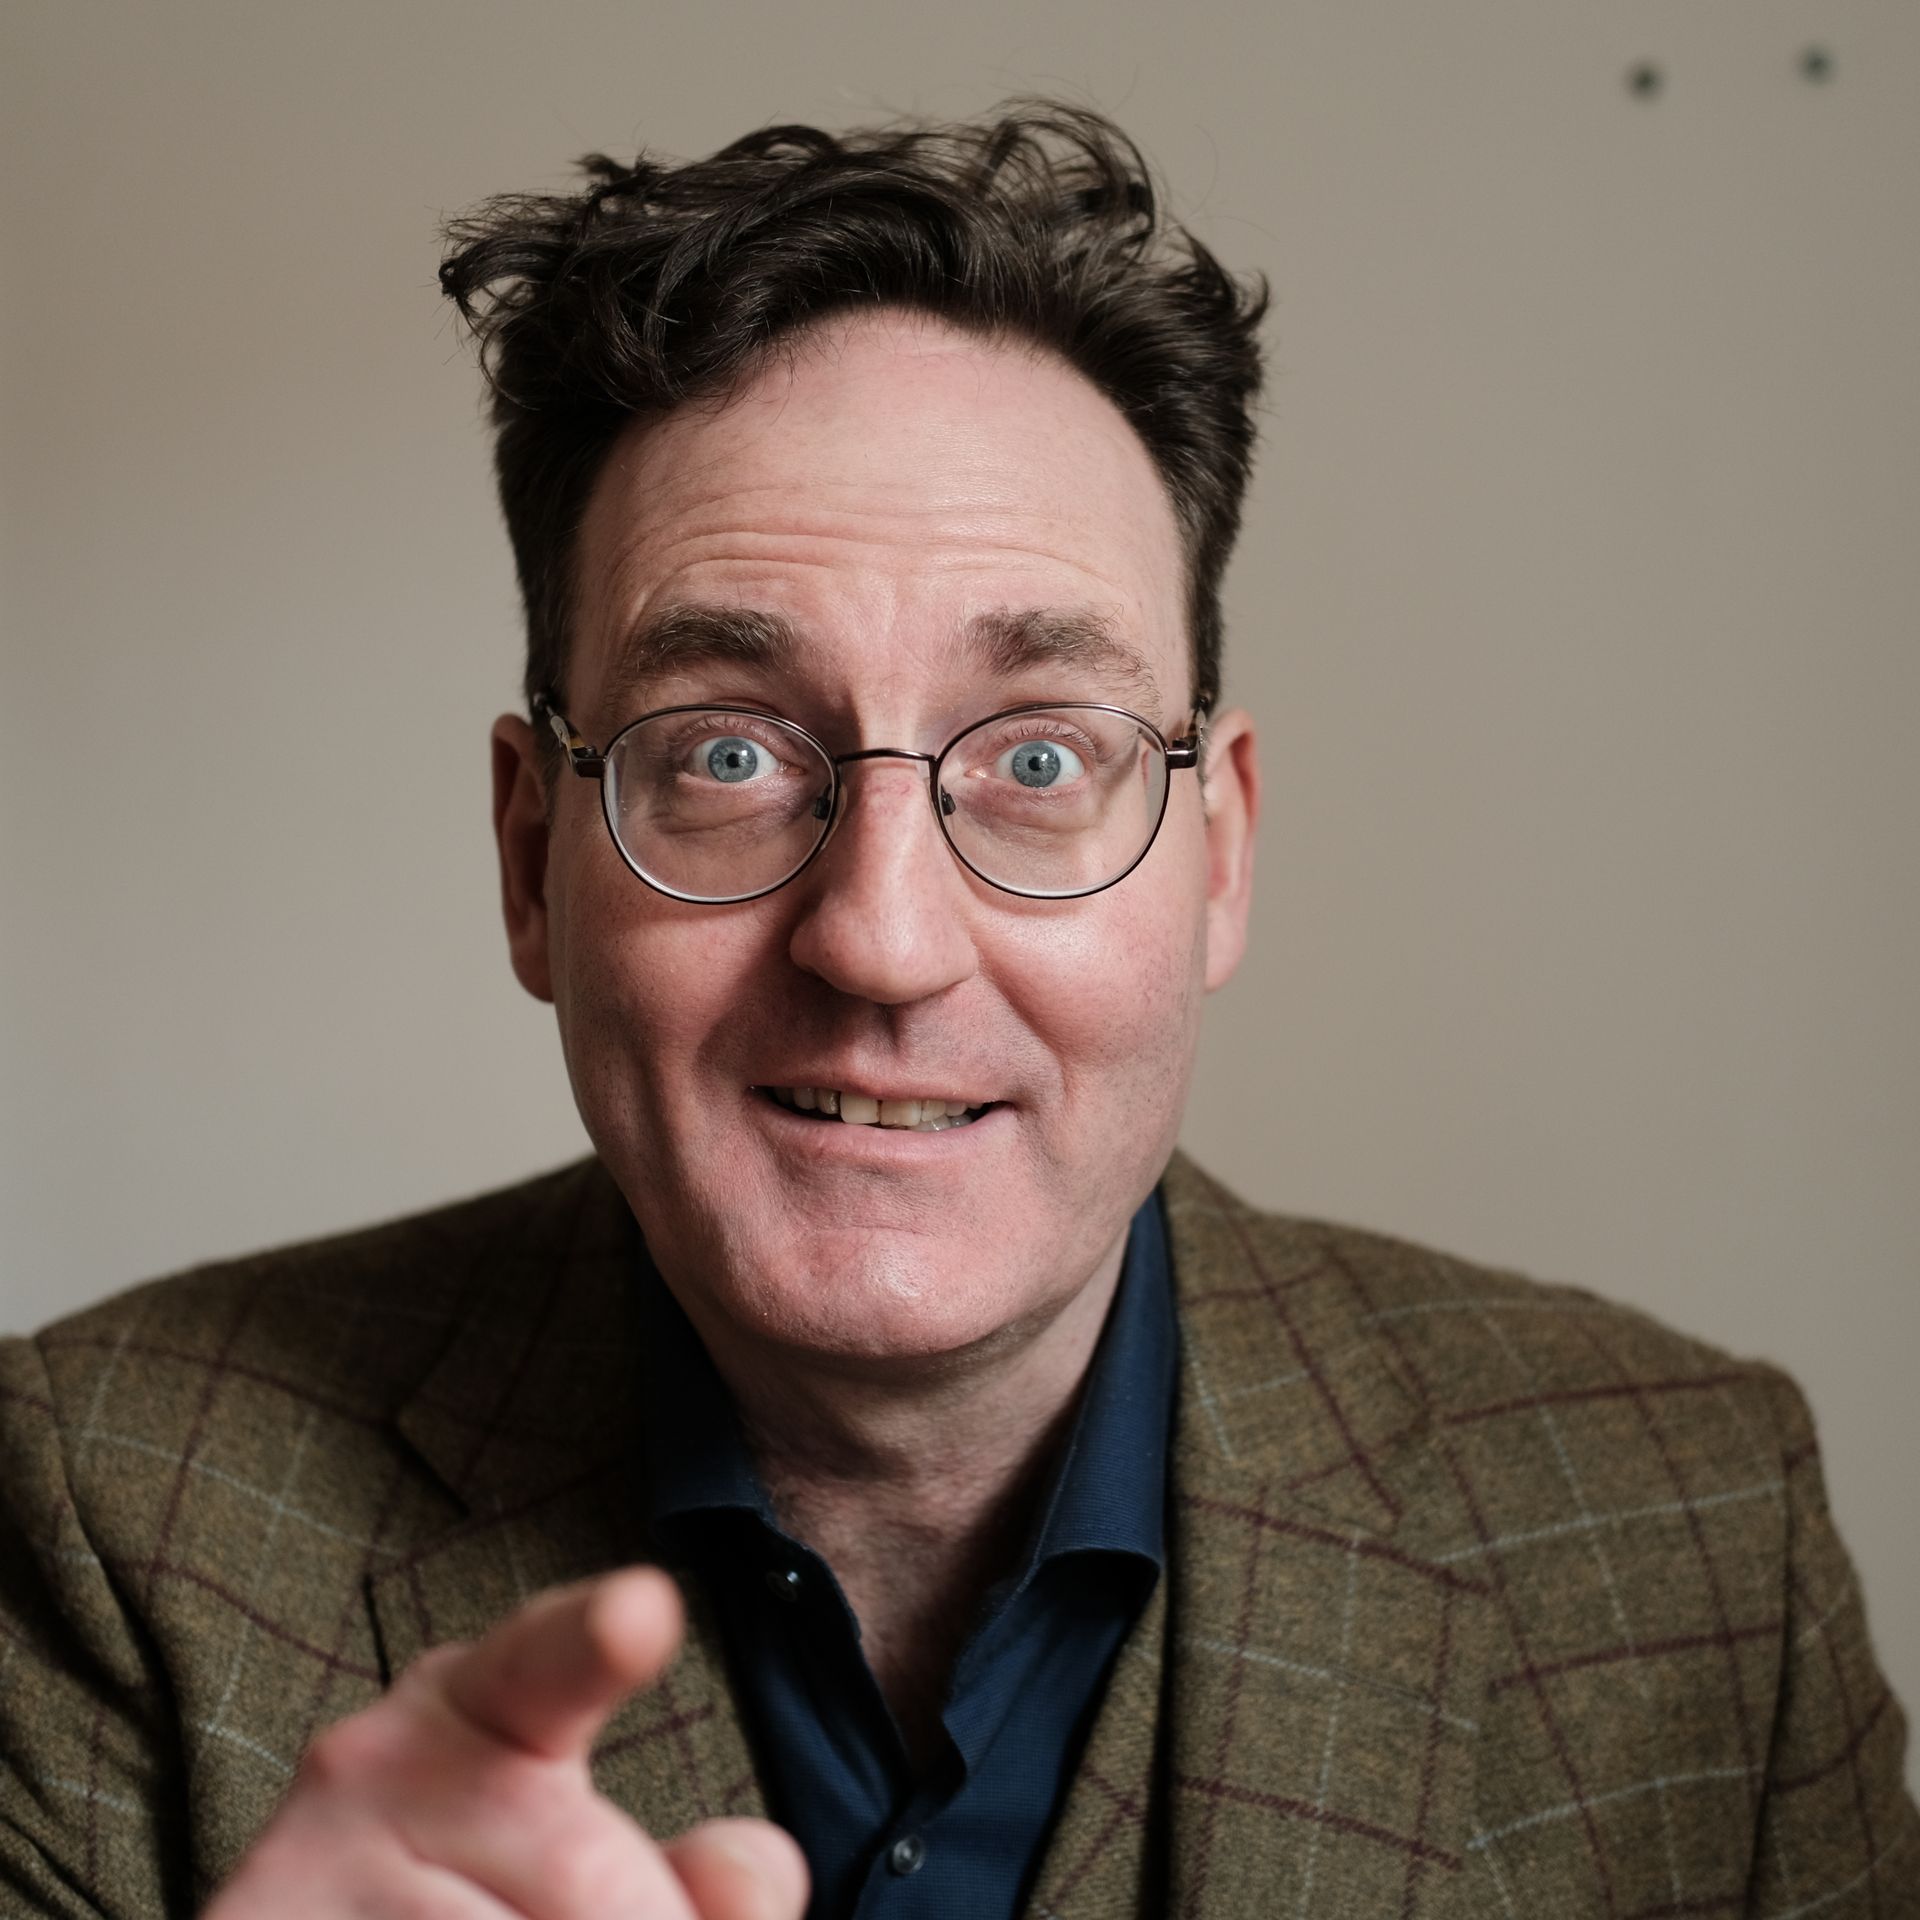 David McSavage 
New Stand-Up Show
Brand New Show
3Olympia Theatre Date Confirmed
